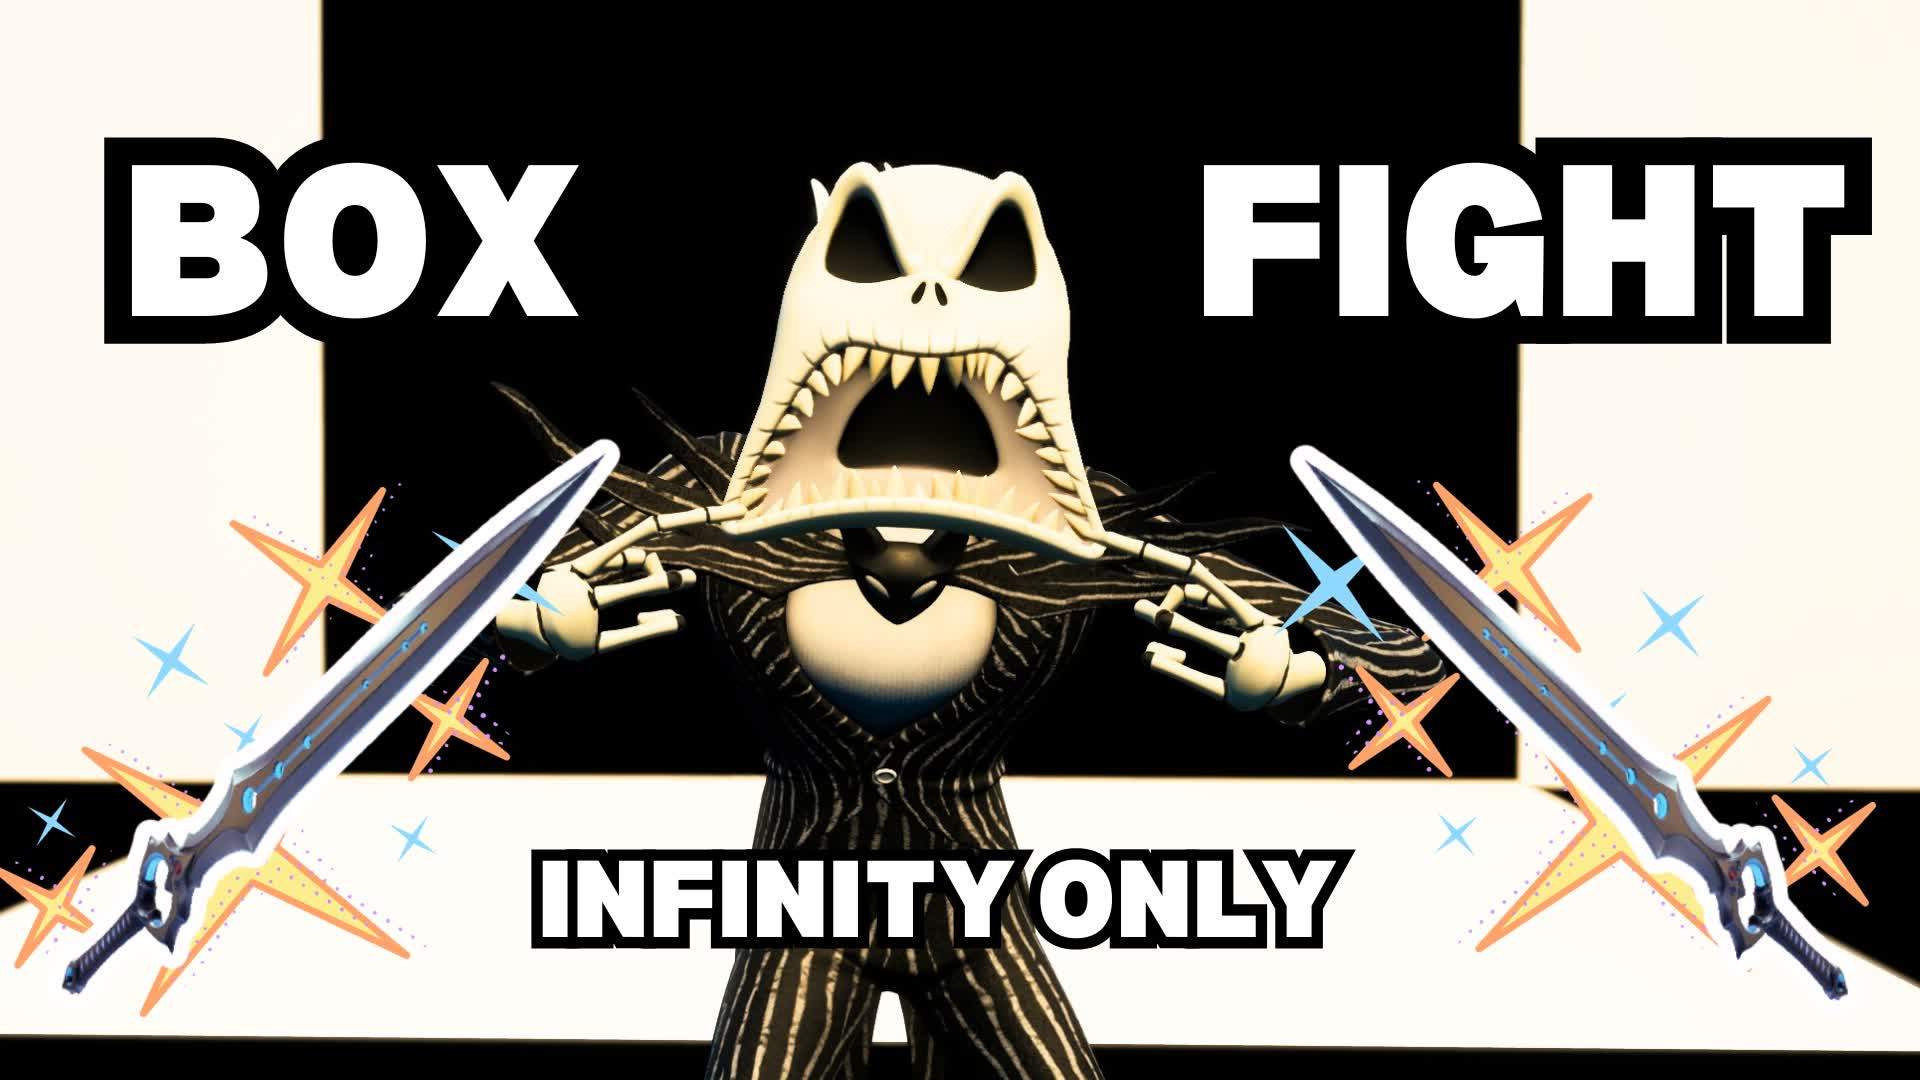 BOX FIGHT INFINITY ONLY- BLACK AND WHITE